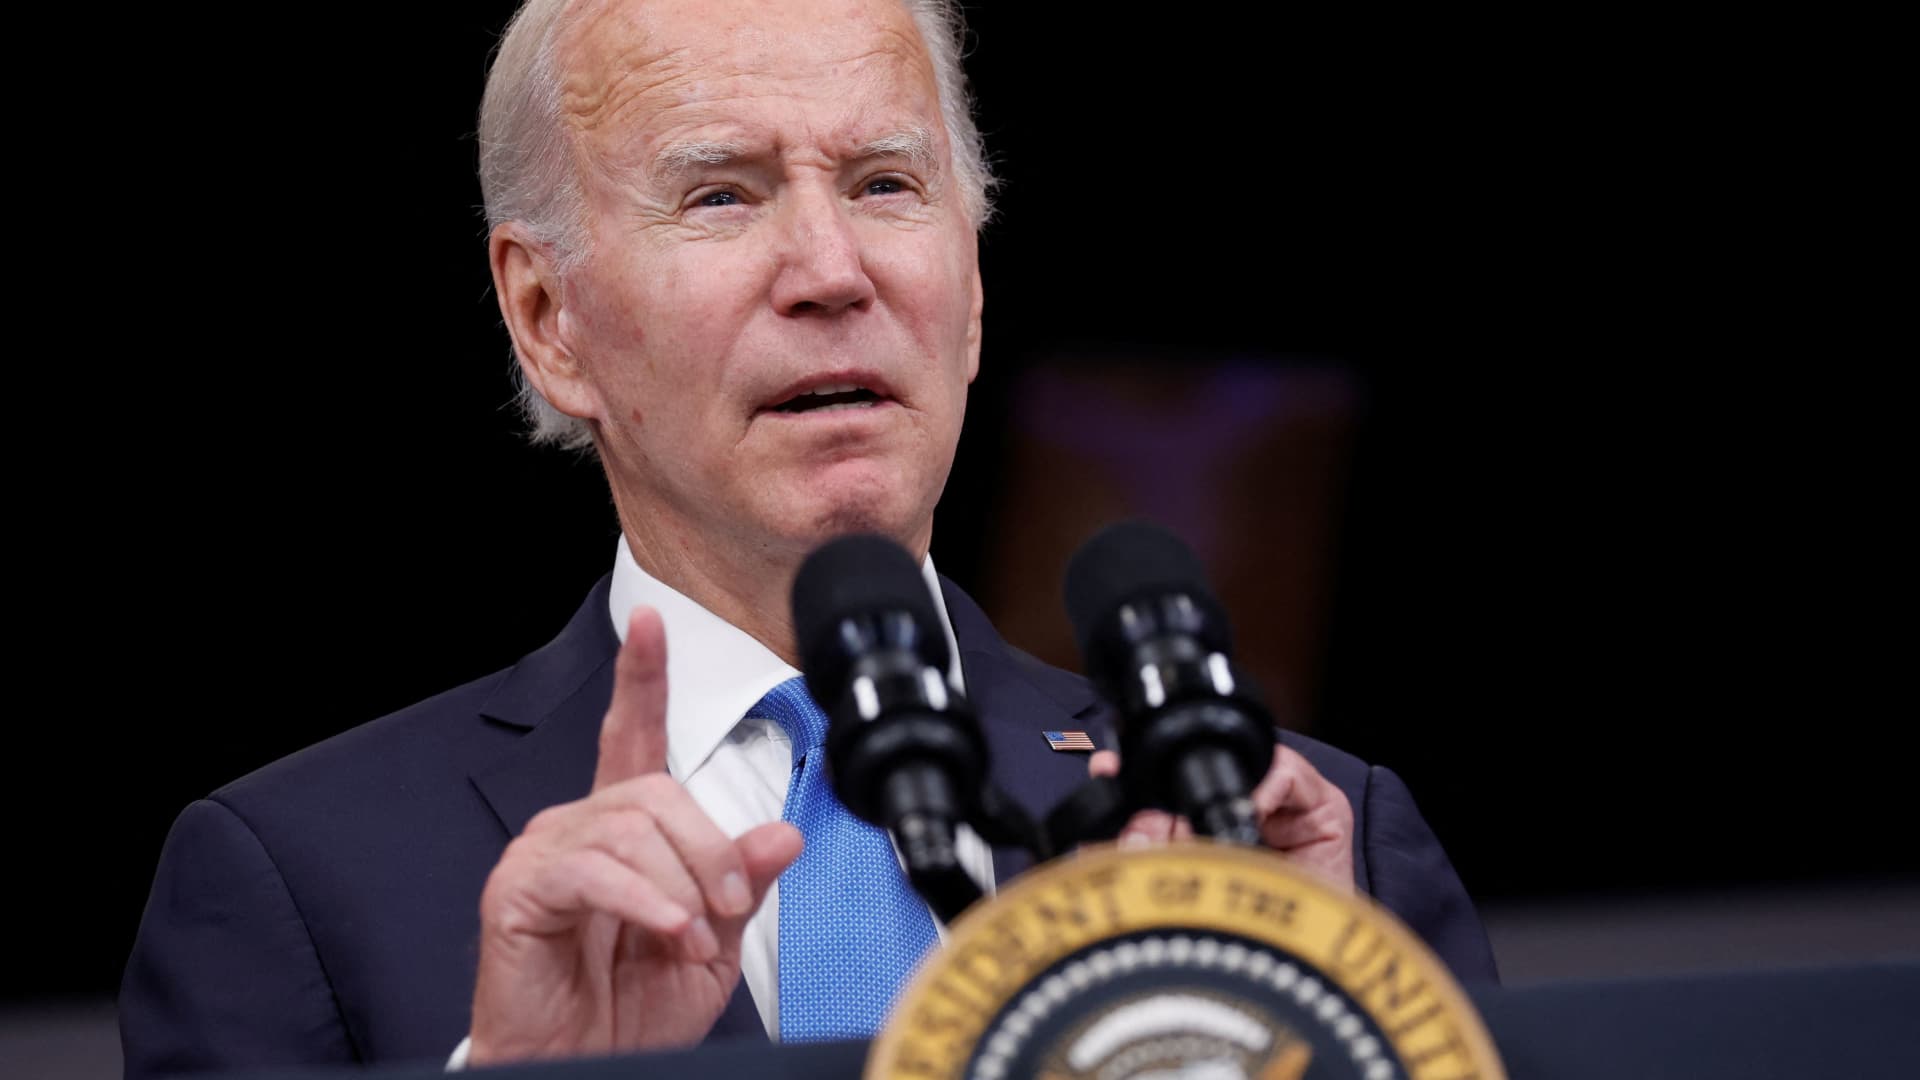 U.S. President Joe Biden delivers remarks while launching a new plan for Americans to receive booster shots and vaccinations against the coronavirus disease (COVID-19), onstage in an auditorium on the White House campus in Washington, October 25, 2022.